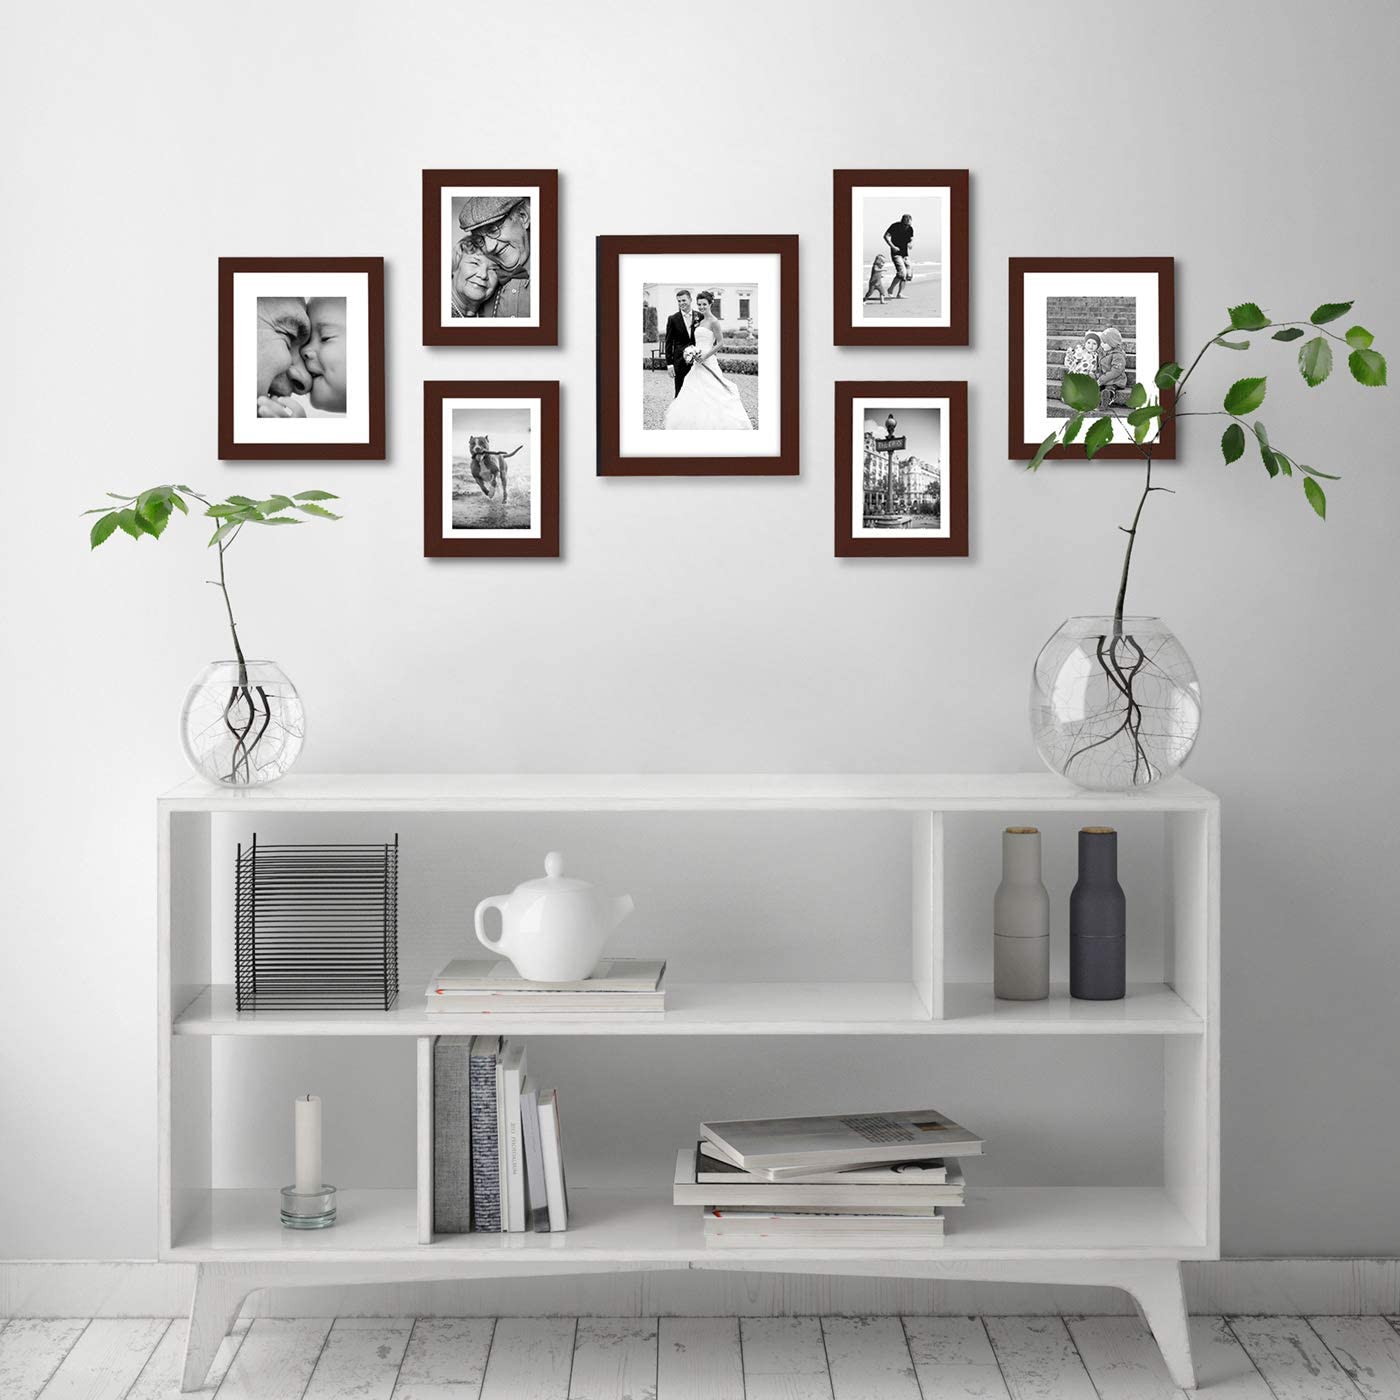 7 Piece Gallery Wall Frame Set - Multipack and Variety of Colors White / Multi - Americanflat